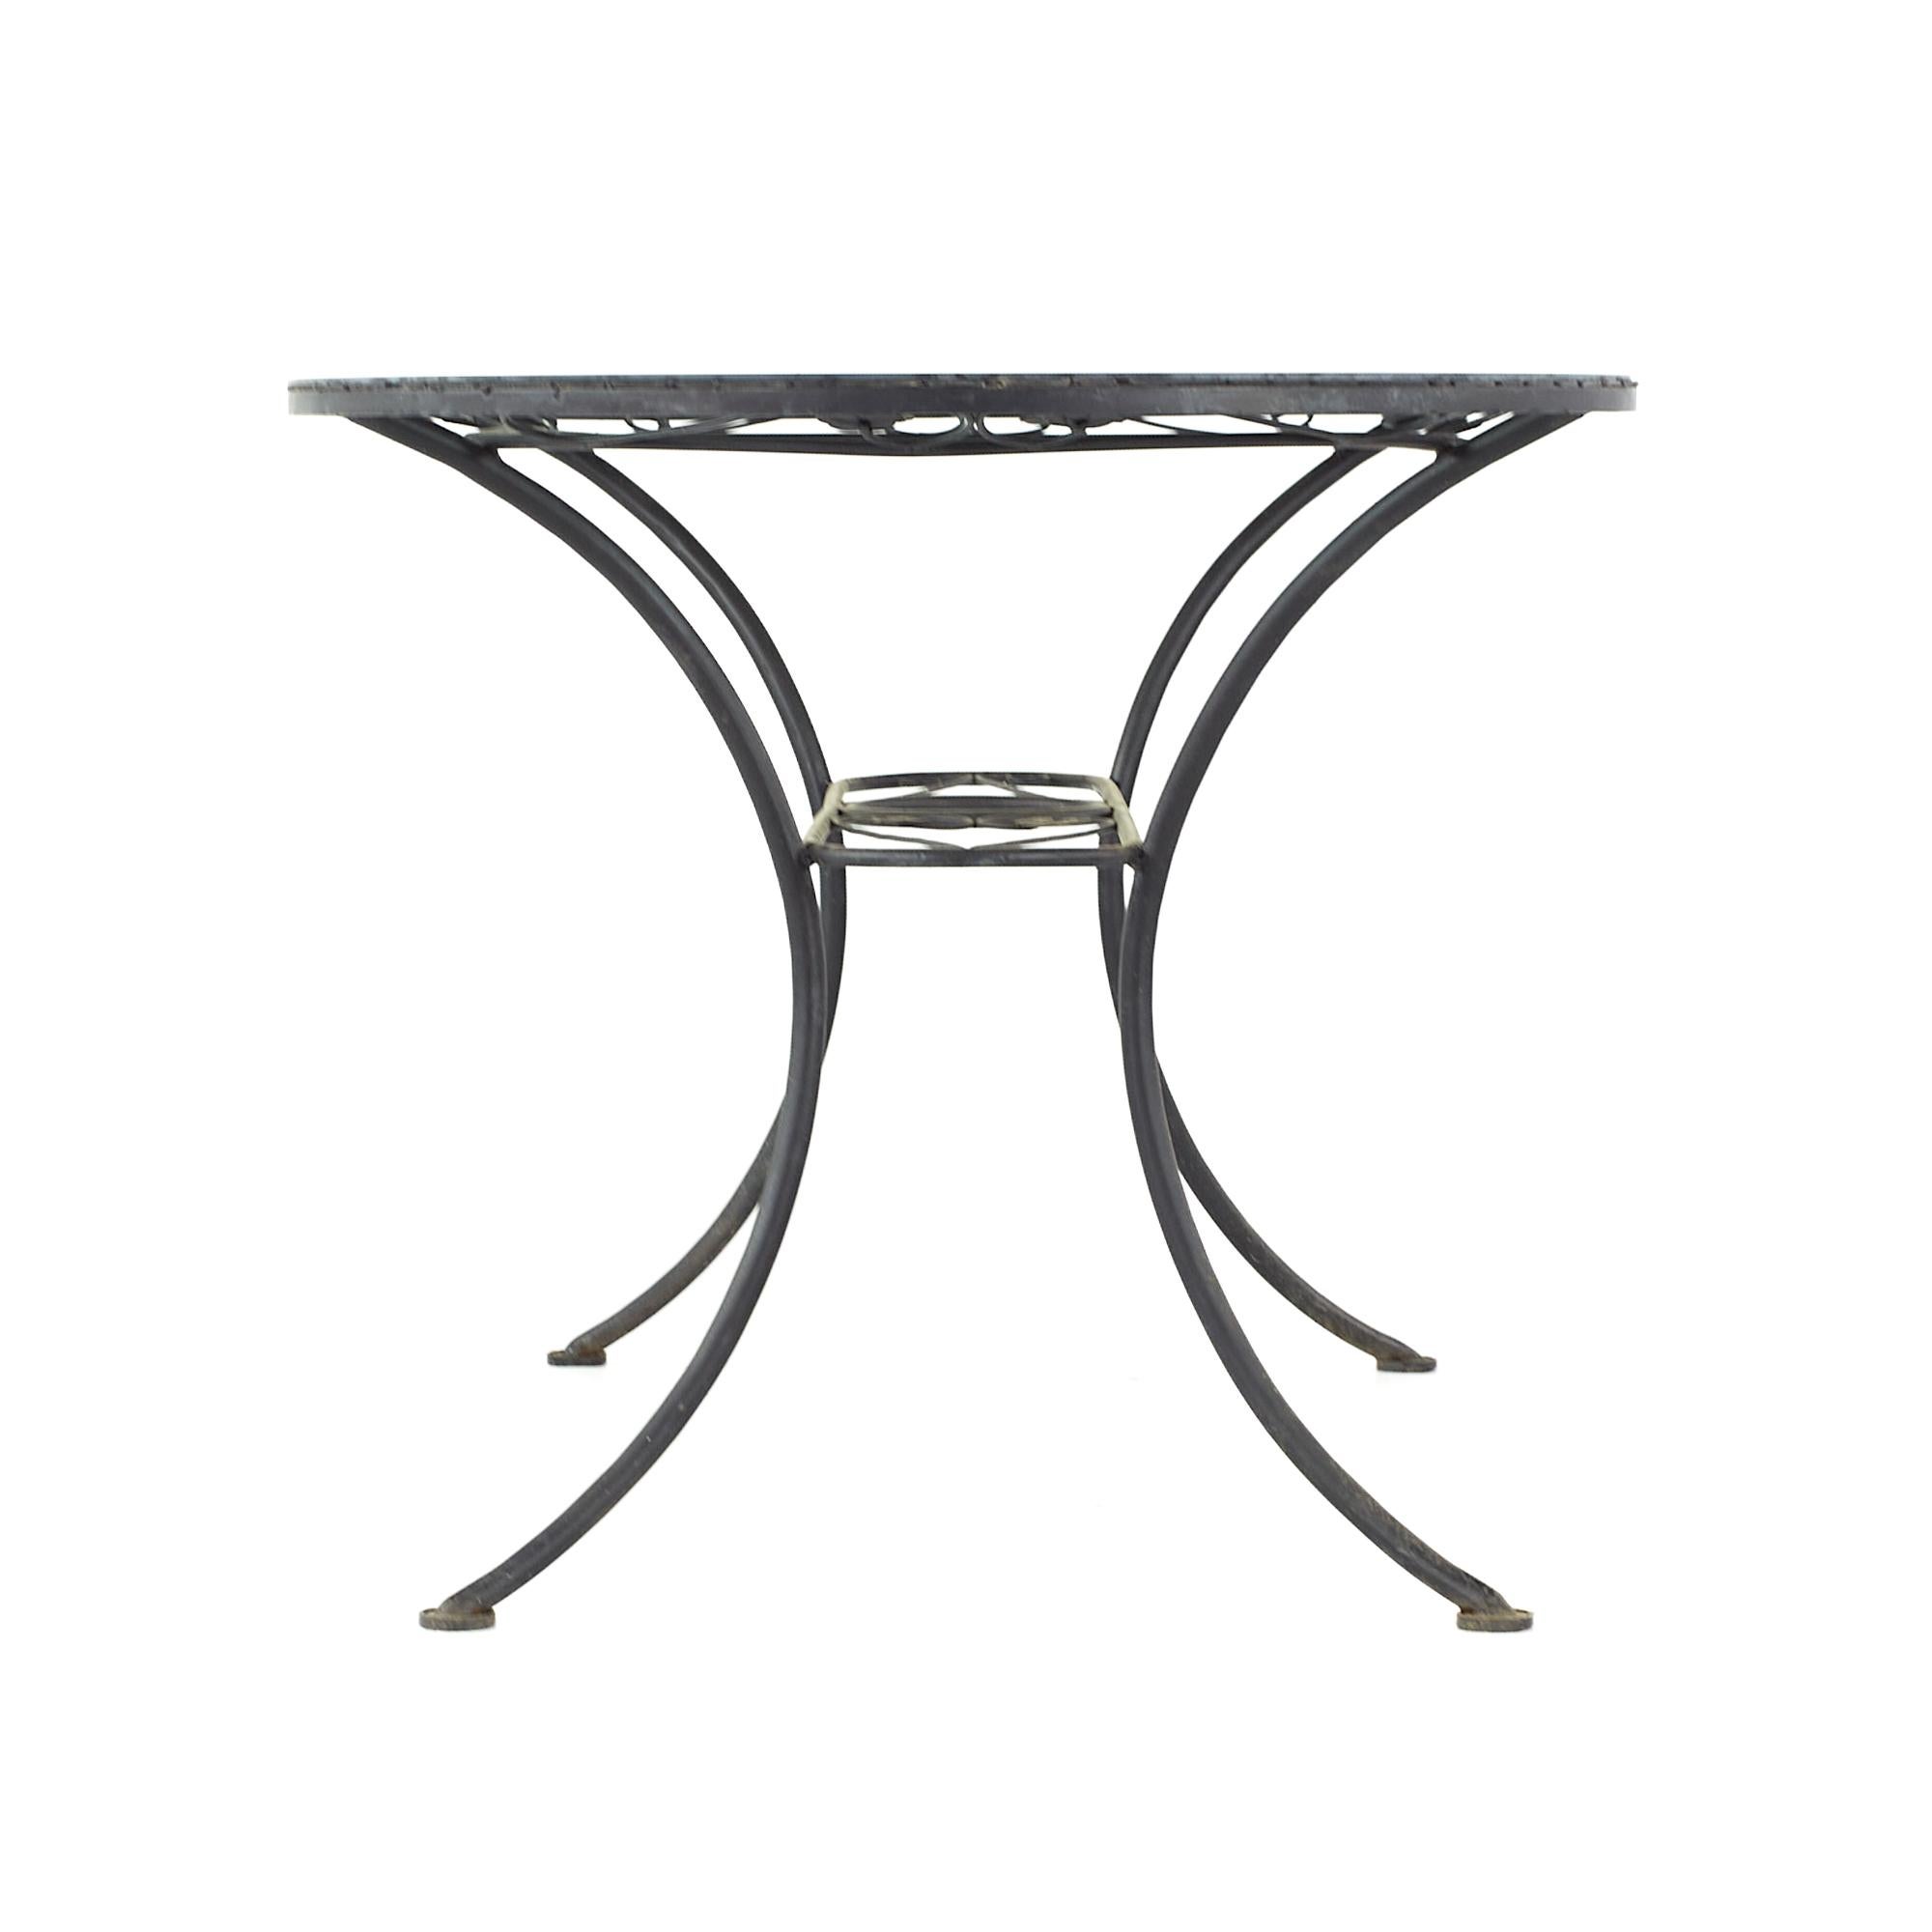 American Arthur Umanoff for Shaver Howard Midcentury Glass Top Dining Table For Sale